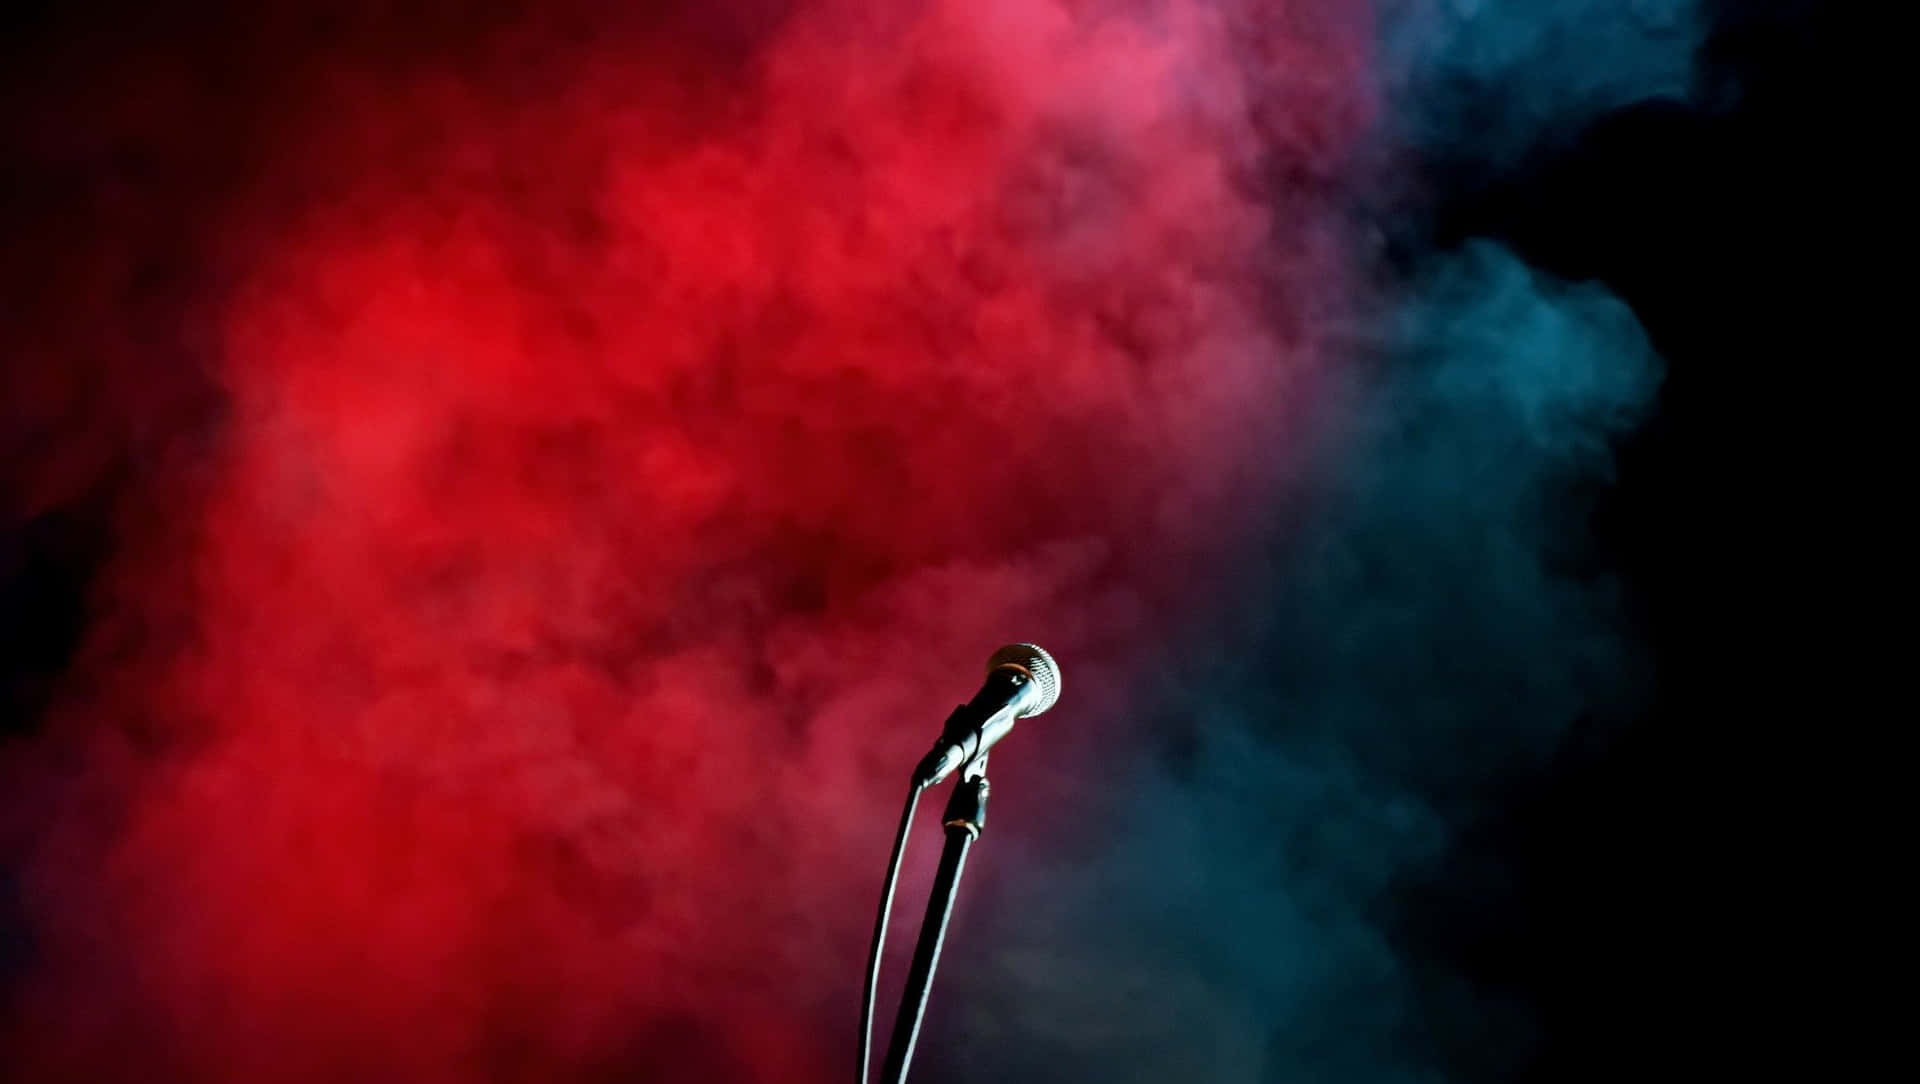 Lone Microphone In Red And Blue Smoke Wallpaper